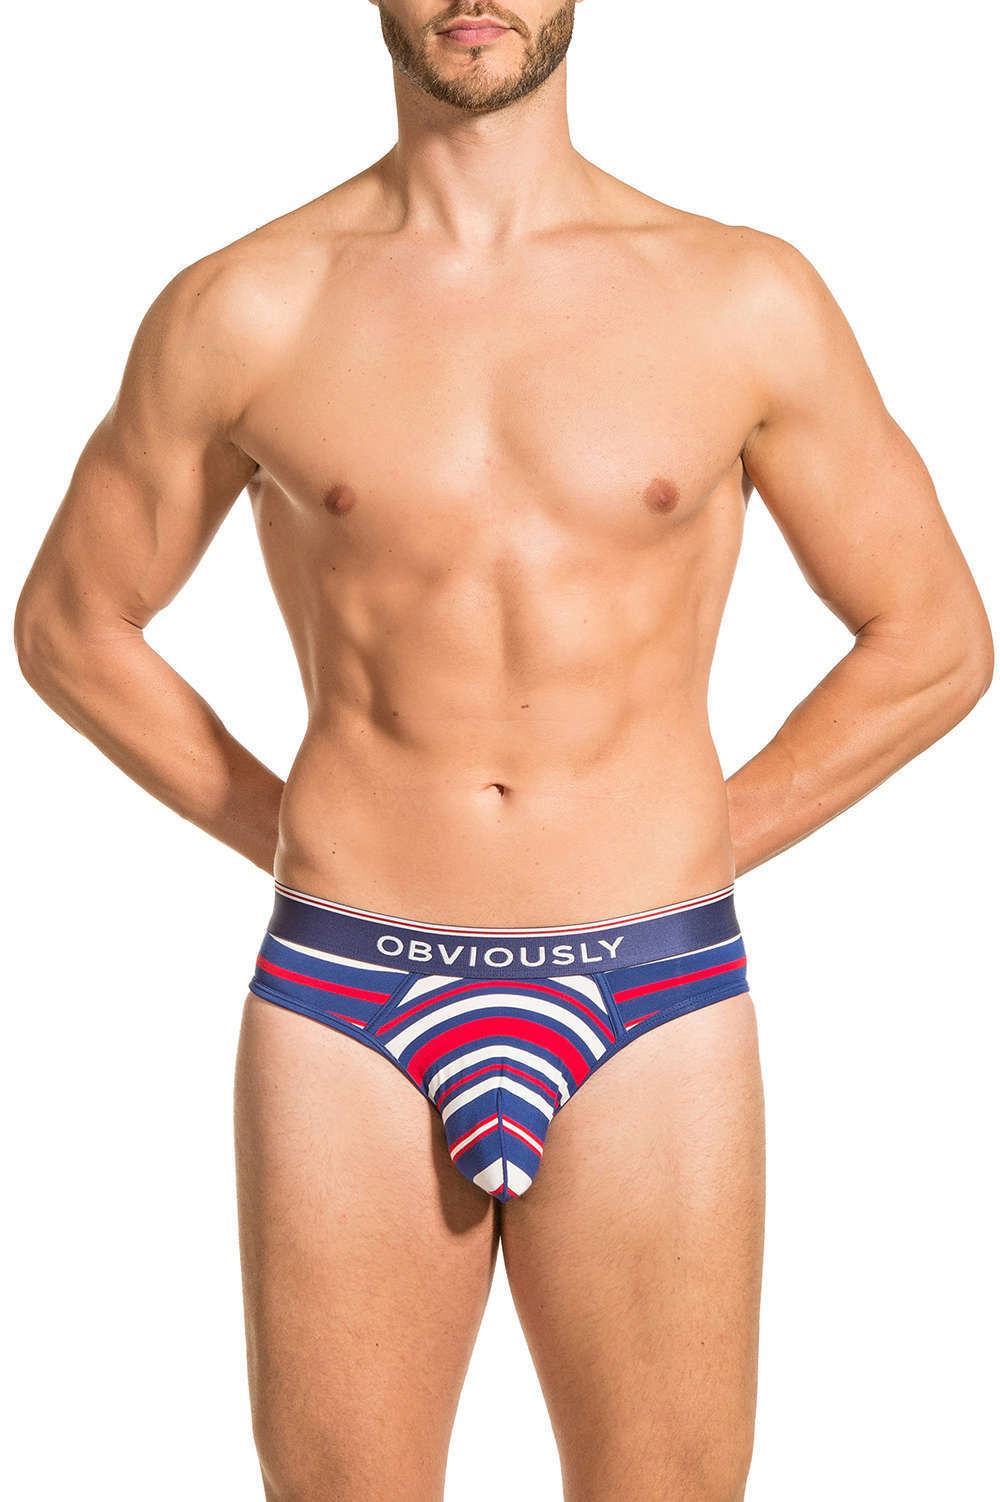 https://images.deadgoodundies.com/tr:q-80,cm-pad_resize/media/catalog/product/o/b/obviously-primeman-anatomax-hipster-brief-red-navy-white-front_1.jpg